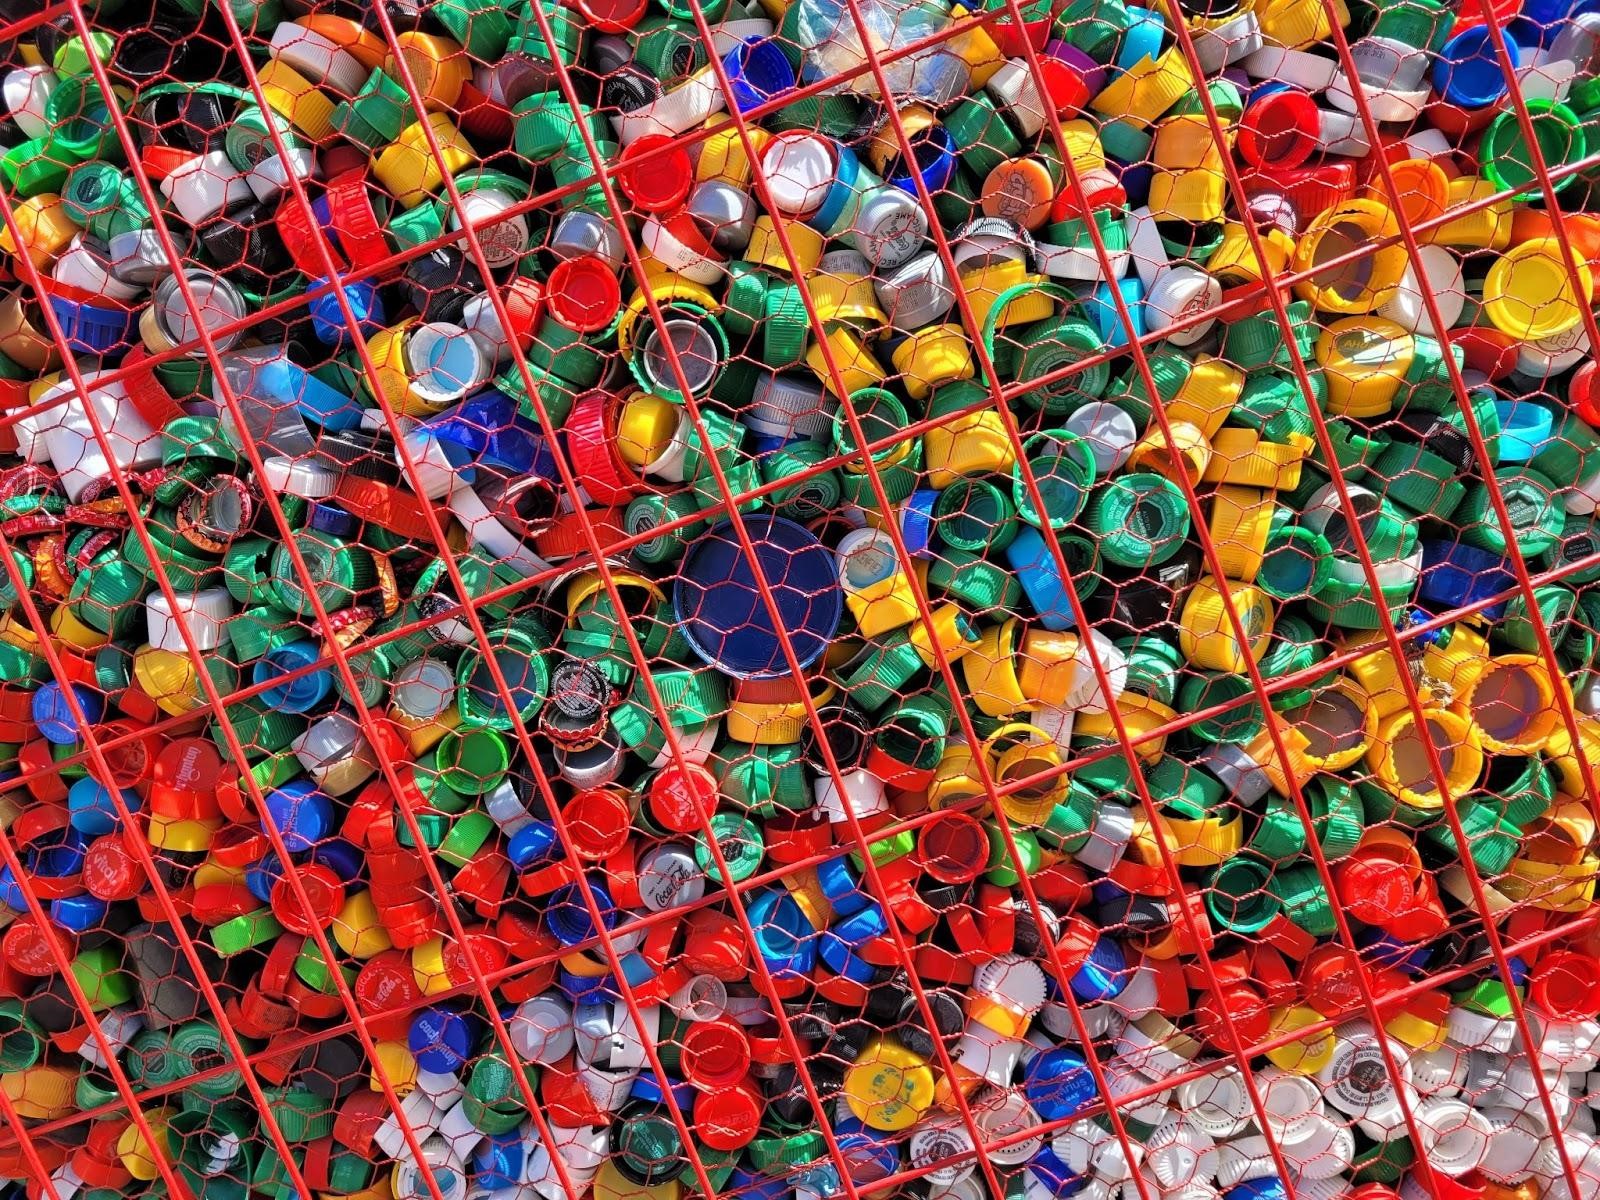 A large number of assorted colored plastic bottle caps in a wire mesh container bound for recycling in Chile